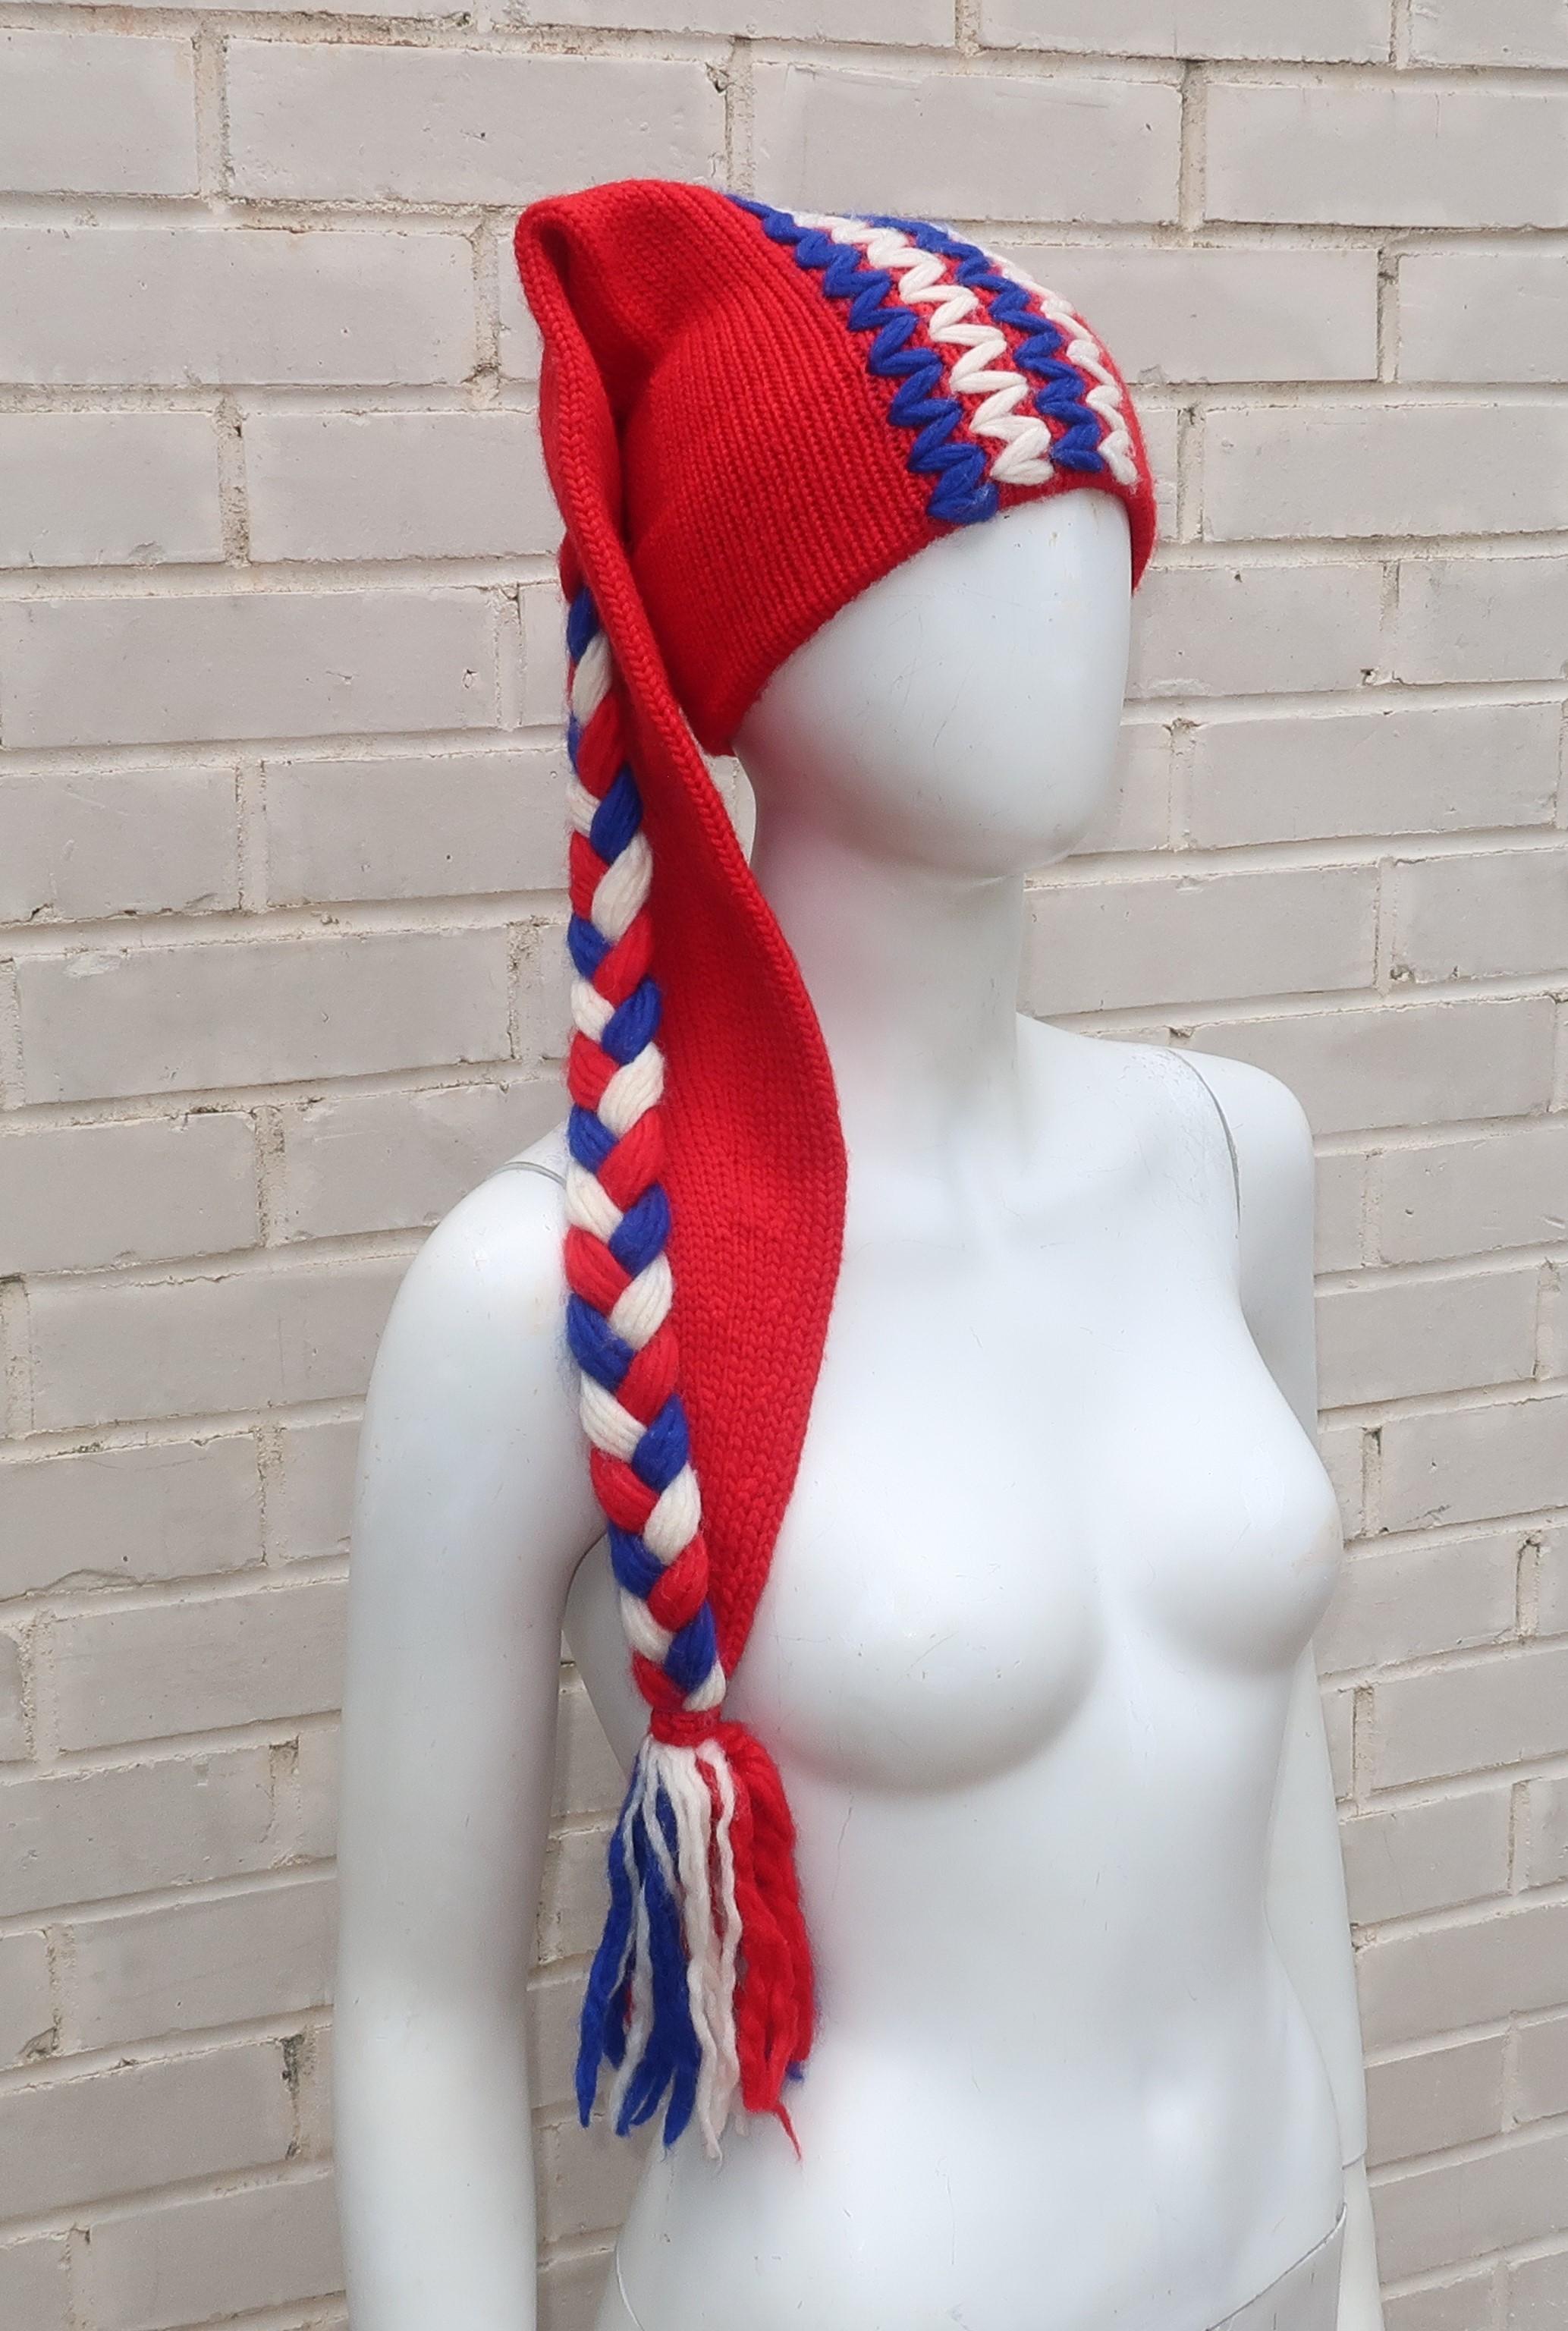 Women's Red, White, Blue Wool Knit Extra Long Stocking Hat, C.1970